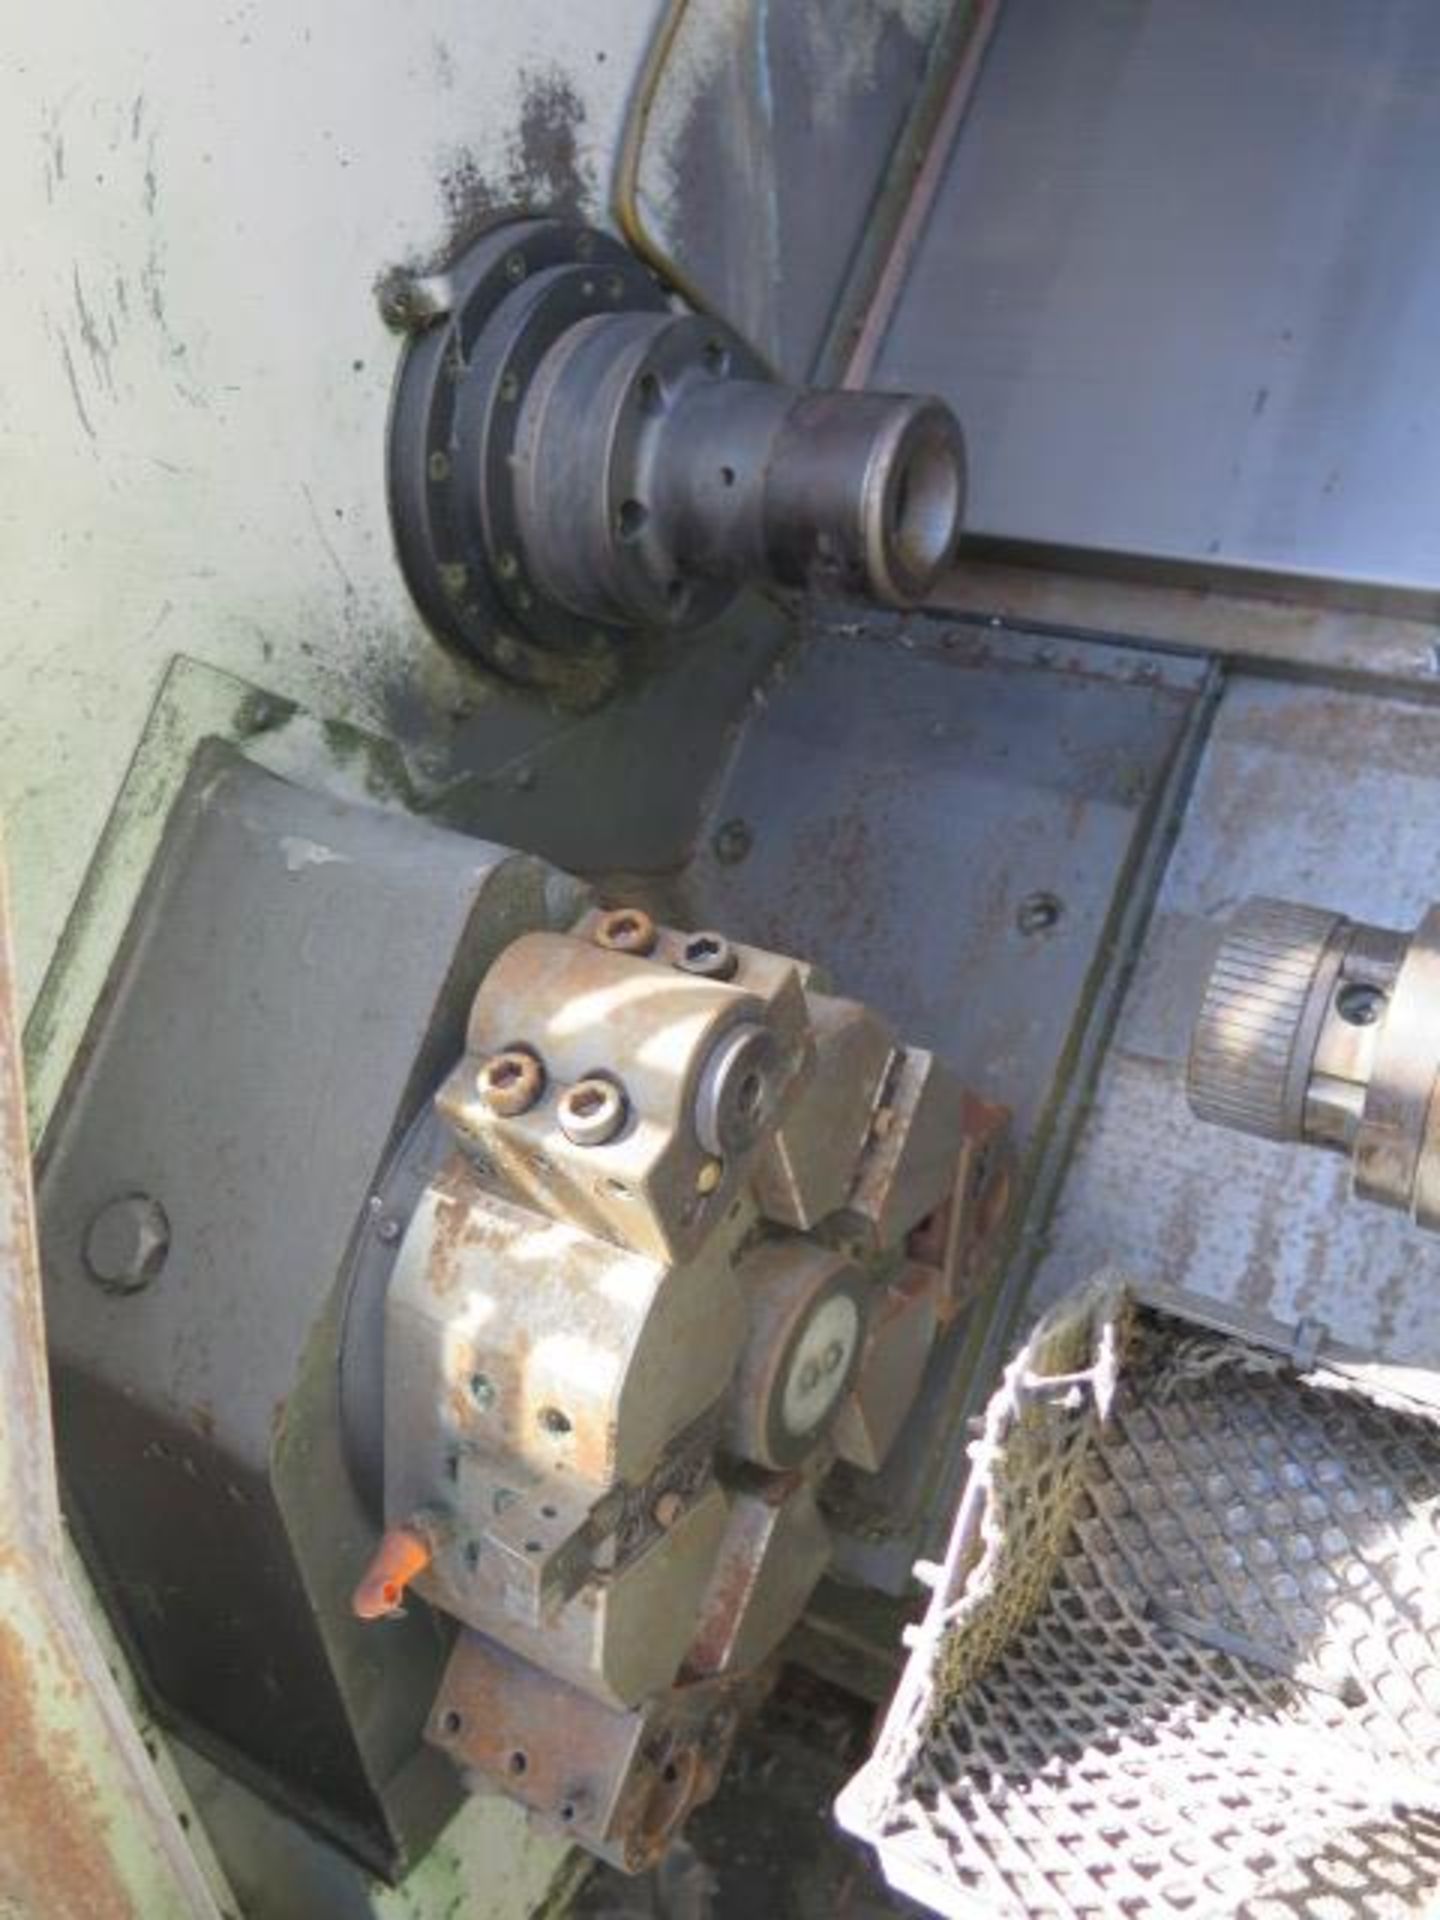 Mori Seiki ZL-15SM Twin Spindle - Twin Turret CNC Turning Center (NEEDS WORK) s/n 254, SOLD AS IS - Image 6 of 13